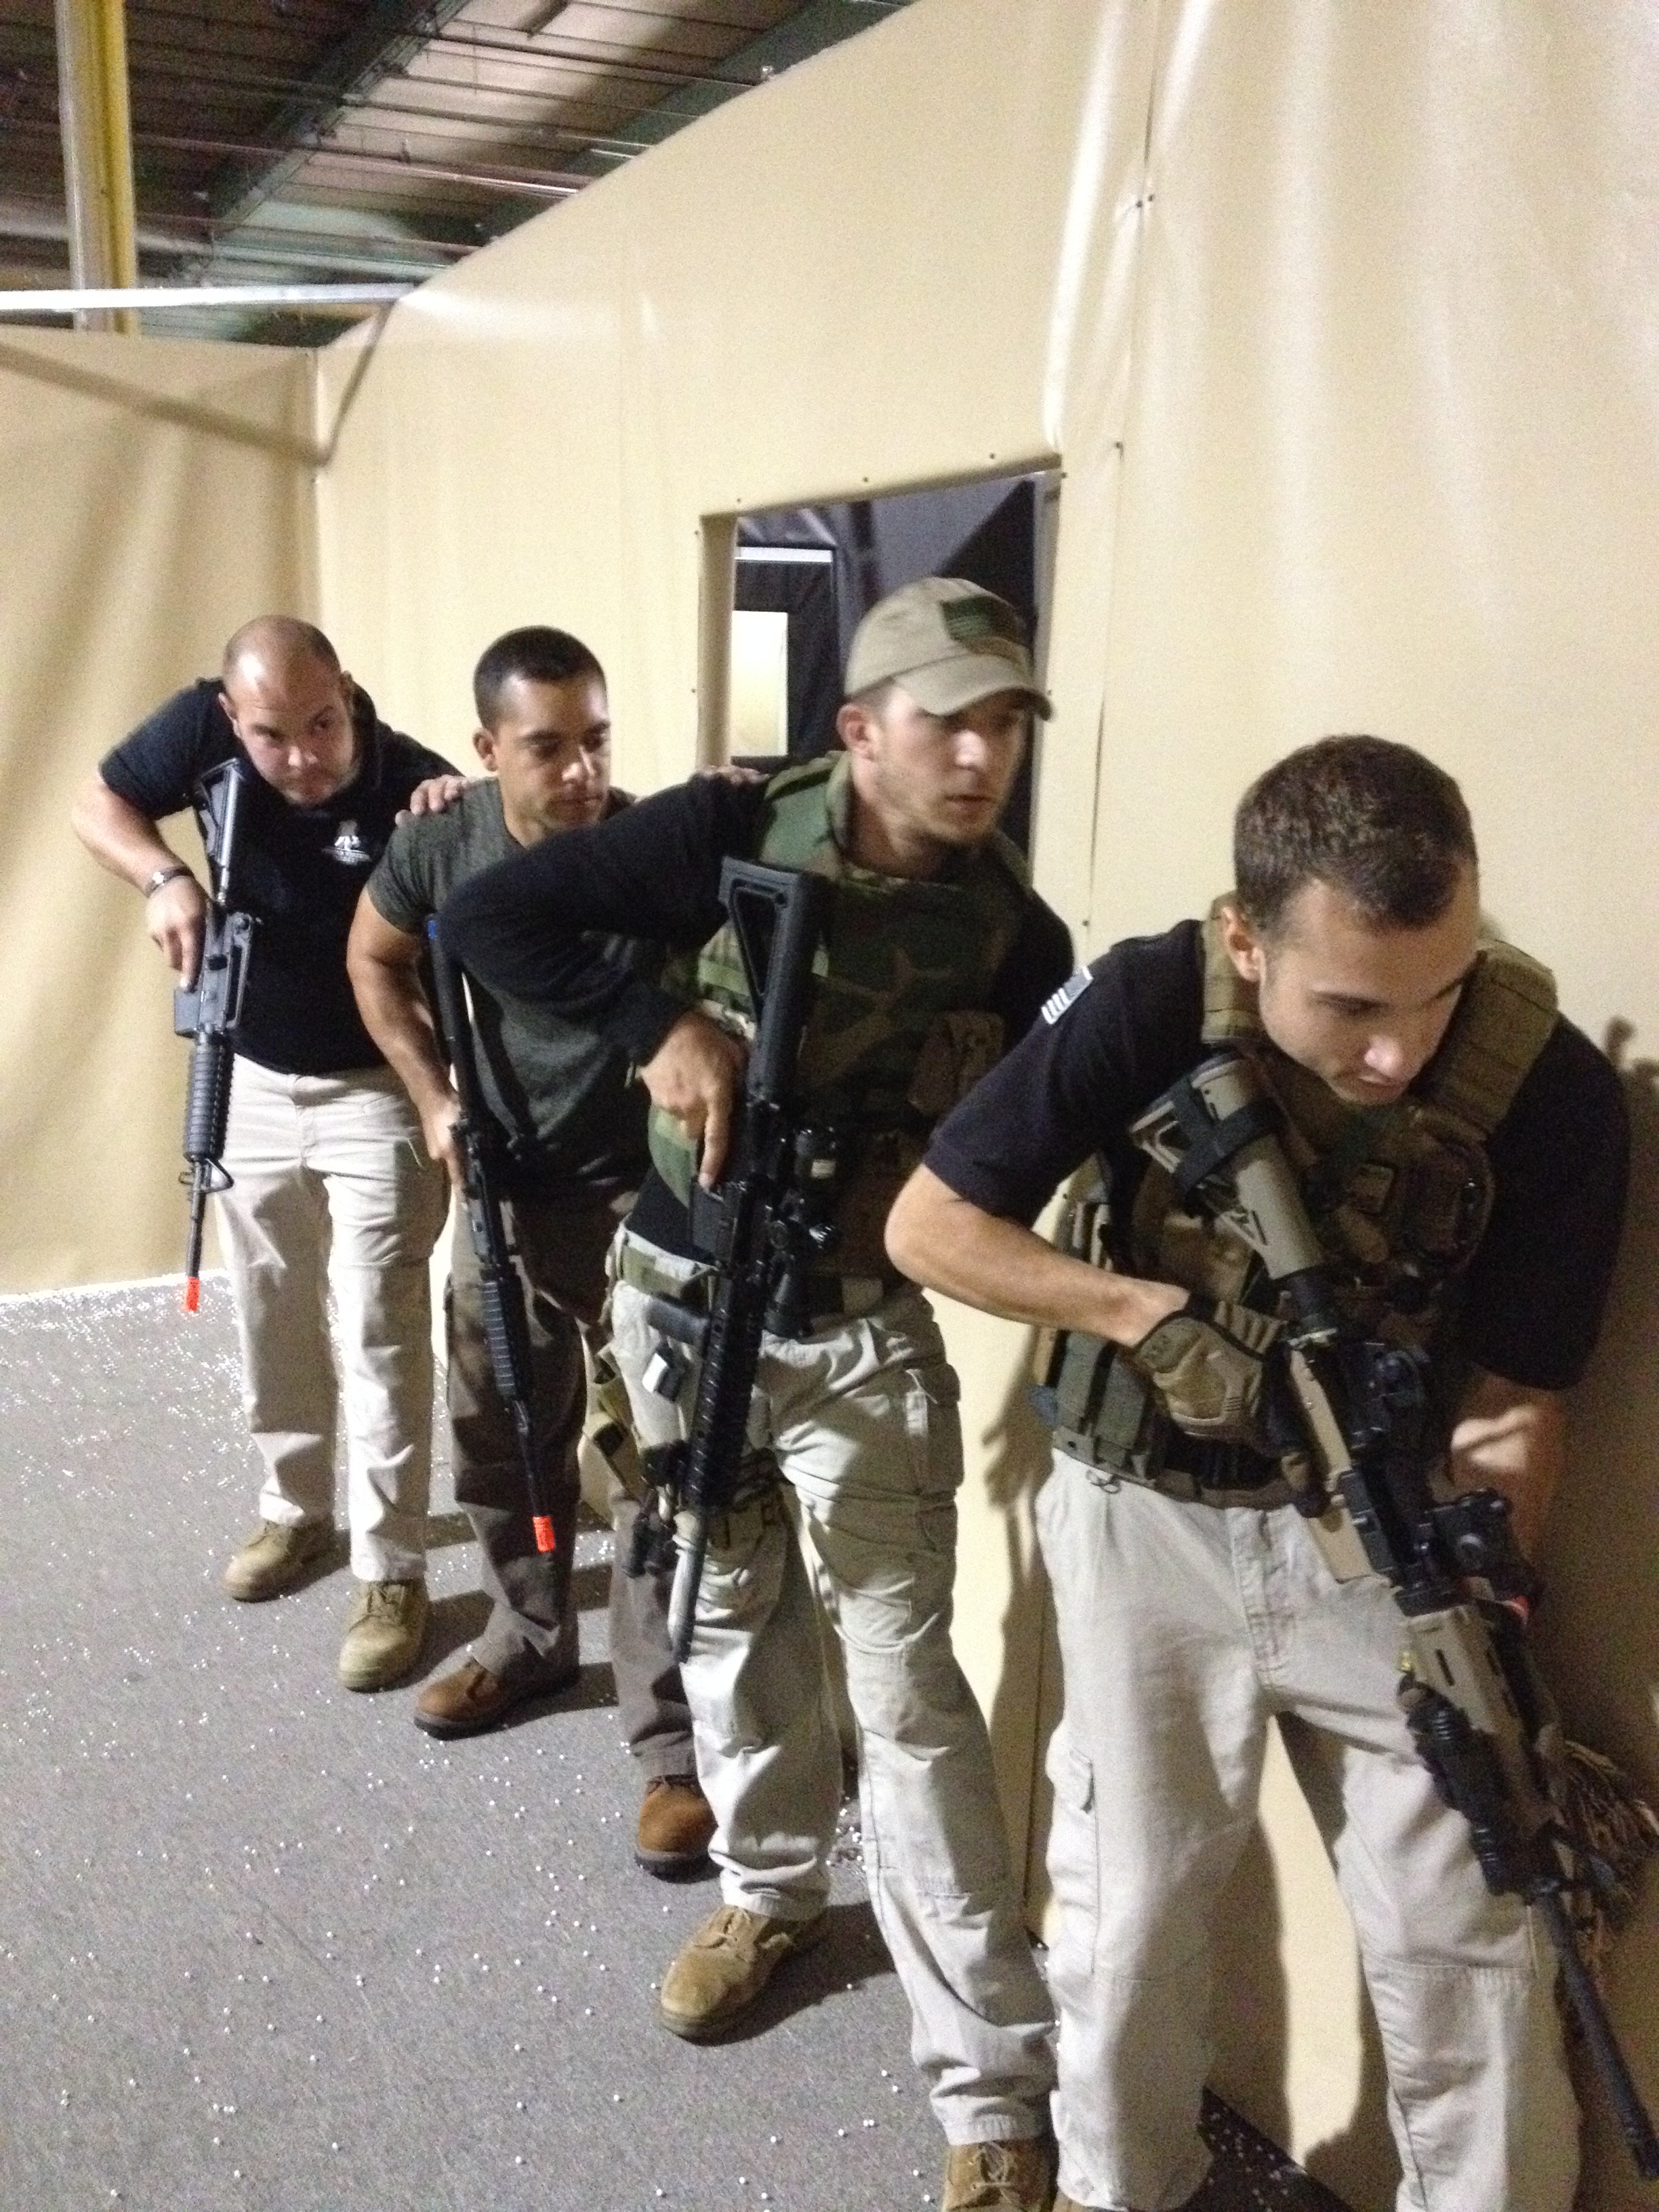 Armed Tactical Training